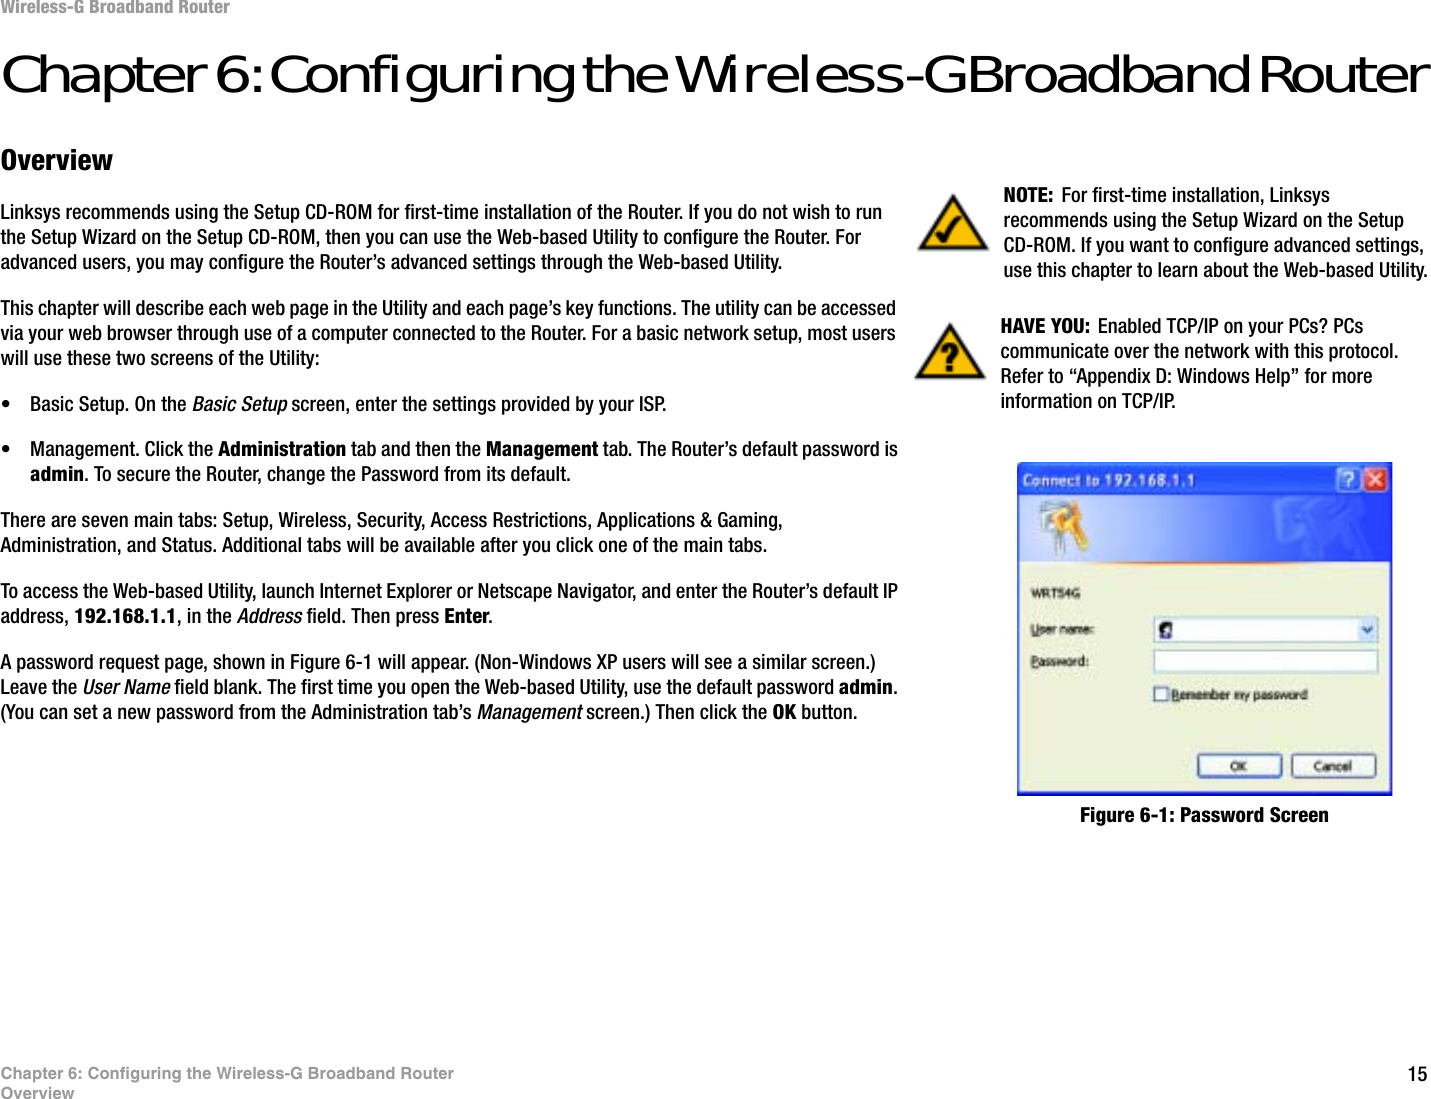 15Chapter 6: Configuring the Wireless-G Broadband RouterOverviewWireless-G Broadband RouterChapter 6: Configuring the Wireless-G Broadband RouterOverviewLinksys recommends using the Setup CD-ROM for first-time installation of the Router. If you do not wish to run the Setup Wizard on the Setup CD-ROM, then you can use the Web-based Utility to configure the Router. For advanced users, you may configure the Router’s advanced settings through the Web-based Utility.This chapter will describe each web page in the Utility and each page’s key functions. The utility can be accessed via your web browser through use of a computer connected to the Router. For a basic network setup, most users will use these two screens of the Utility:• Basic Setup. On the Basic Setup screen, enter the settings provided by your ISP.• Management. Click the Administration tab and then the Management tab. The Router’s default password is admin. To secure the Router, change the Password from its default.There are seven main tabs: Setup, Wireless, Security, Access Restrictions, Applications &amp; Gaming, Administration, and Status. Additional tabs will be available after you click one of the main tabs.To access the Web-based Utility, launch Internet Explorer or Netscape Navigator, and enter the Router’s default IP address, 192.168.1.1, in the Address field. Then press Enter.A password request page, shown in Figure 6-1 will appear. (Non-Windows XP users will see a similar screen.) Leave the User Name field blank. The first time you open the Web-based Utility, use the default password admin.(You can set a new password from the Administration tab’s Management screen.) Then click the OK button. HAVE YOU: Enabled TCP/IP on your PCs? PCs communicate over the network with this protocol. Refer to “Appendix D: Windows Help” for more information on TCP/IP.NOTE: For first-time installation, Linksys recommends using the Setup Wizard on the Setup CD-ROM. If you want to configure advanced settings, use this chapter to learn about the Web-based Utility.Figure 6-1: Password Screen